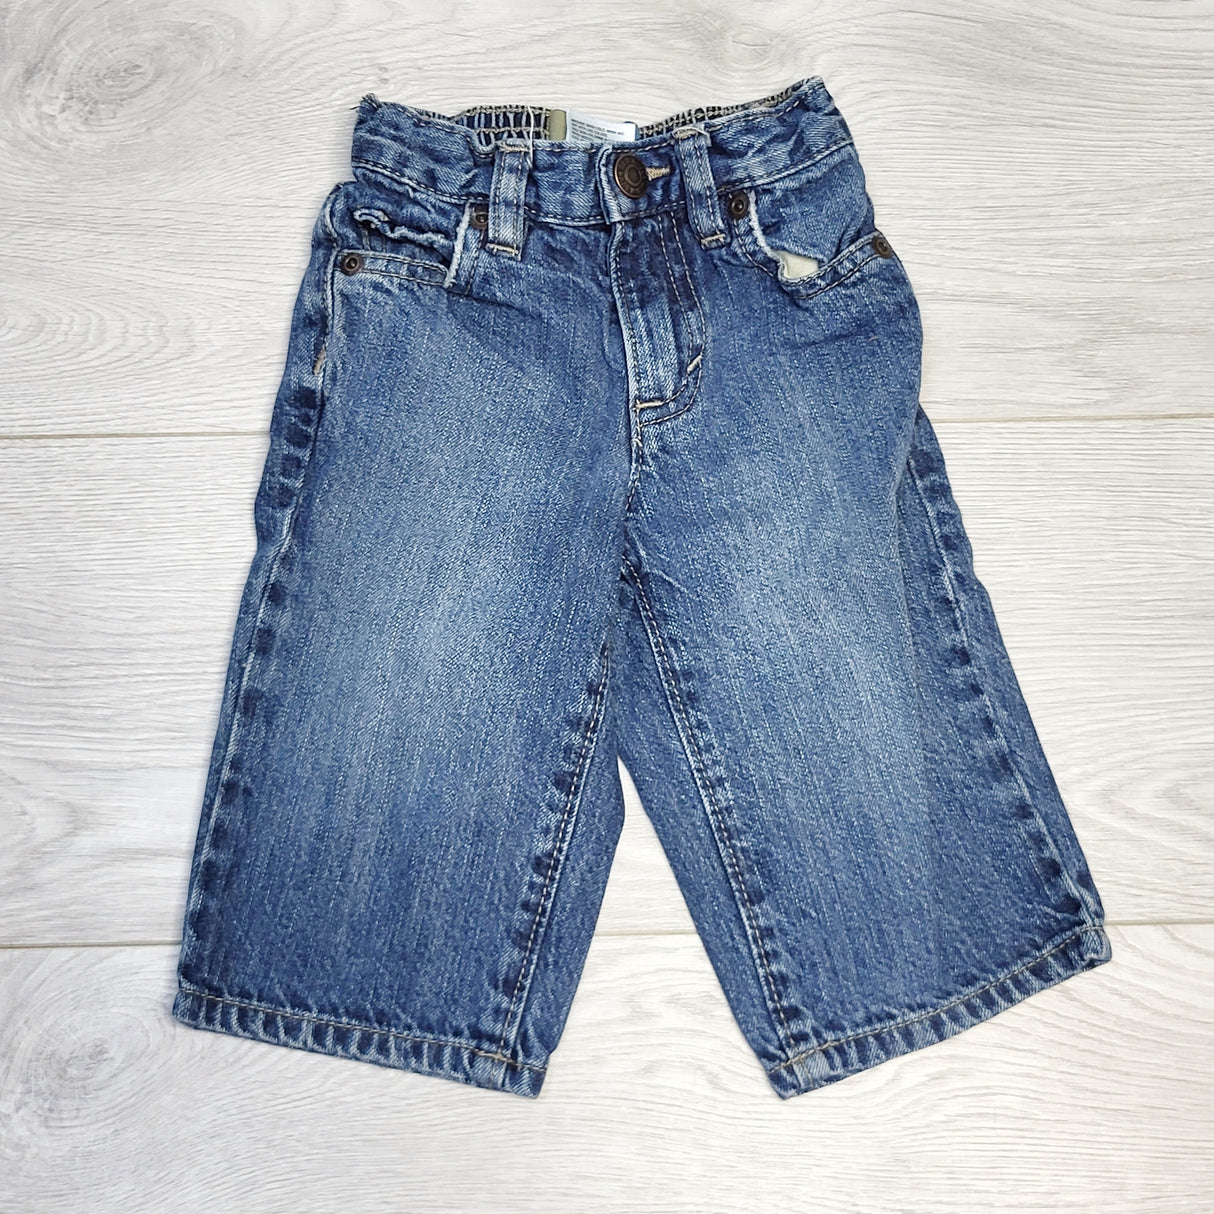 CHOL2 - Old Navy loose fit jeans, size 6-12 months